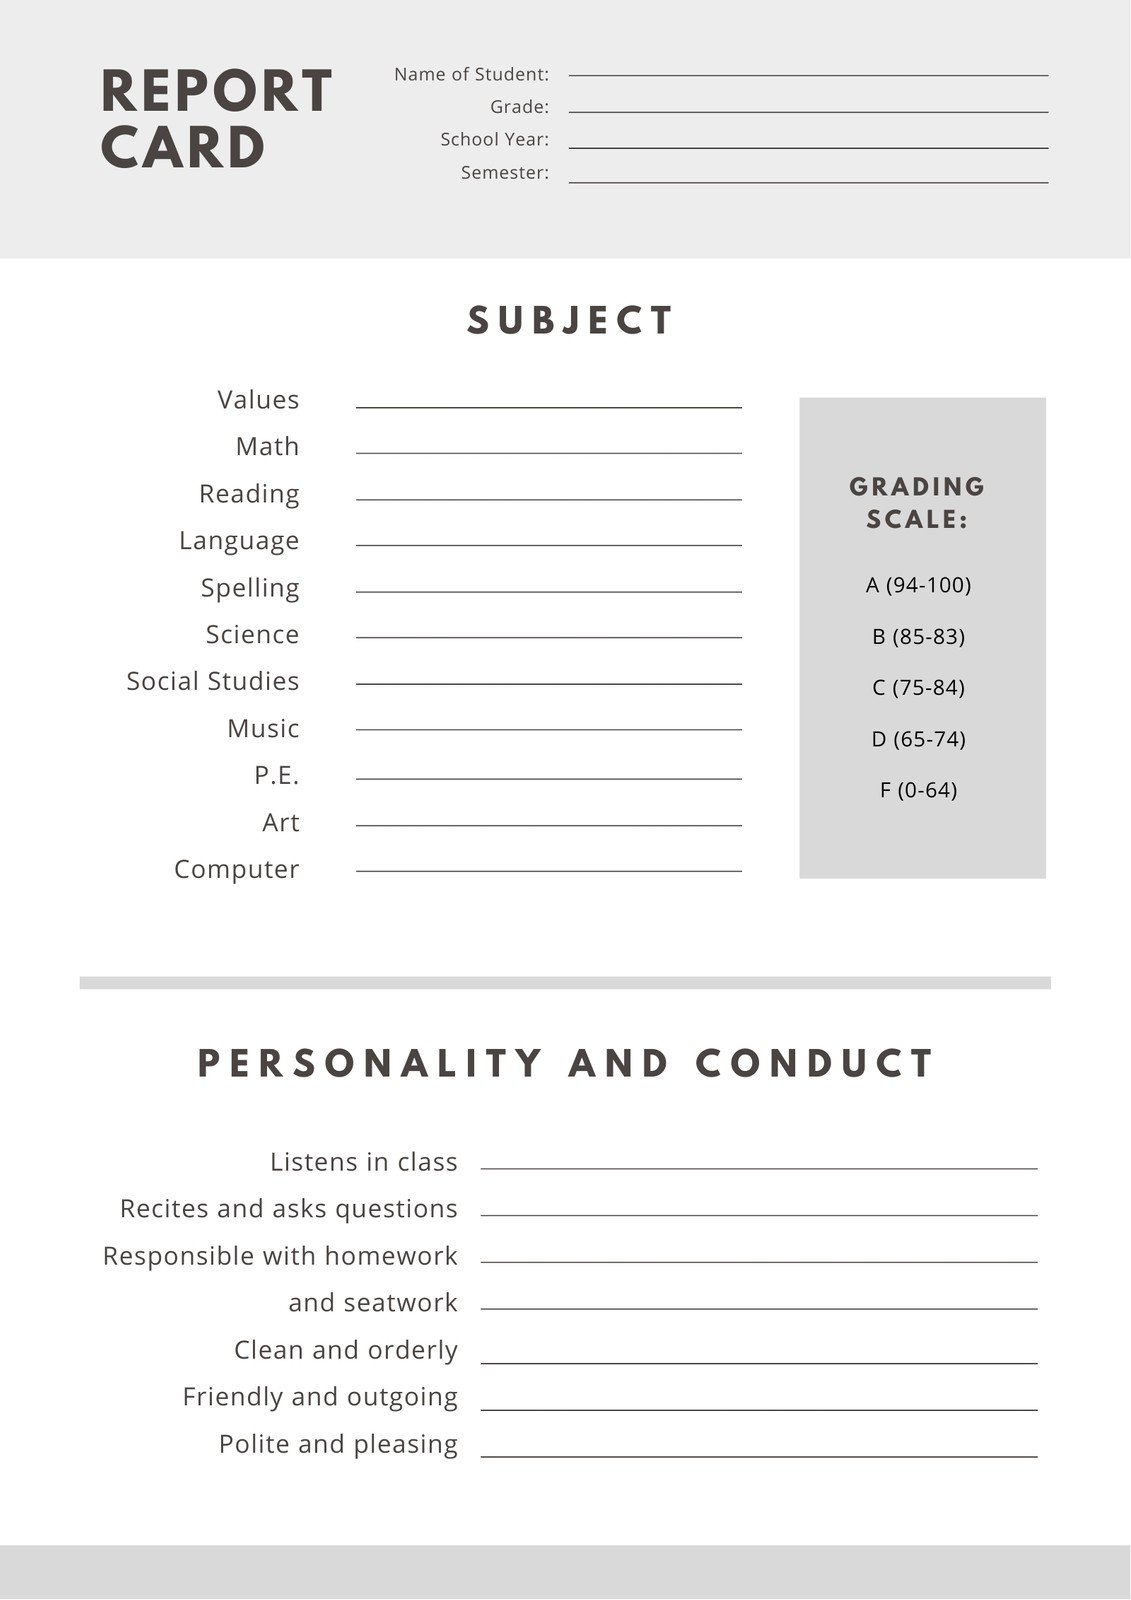 Page 23 - Free, printable, customizable report card templates  Canva Throughout Result Card Template